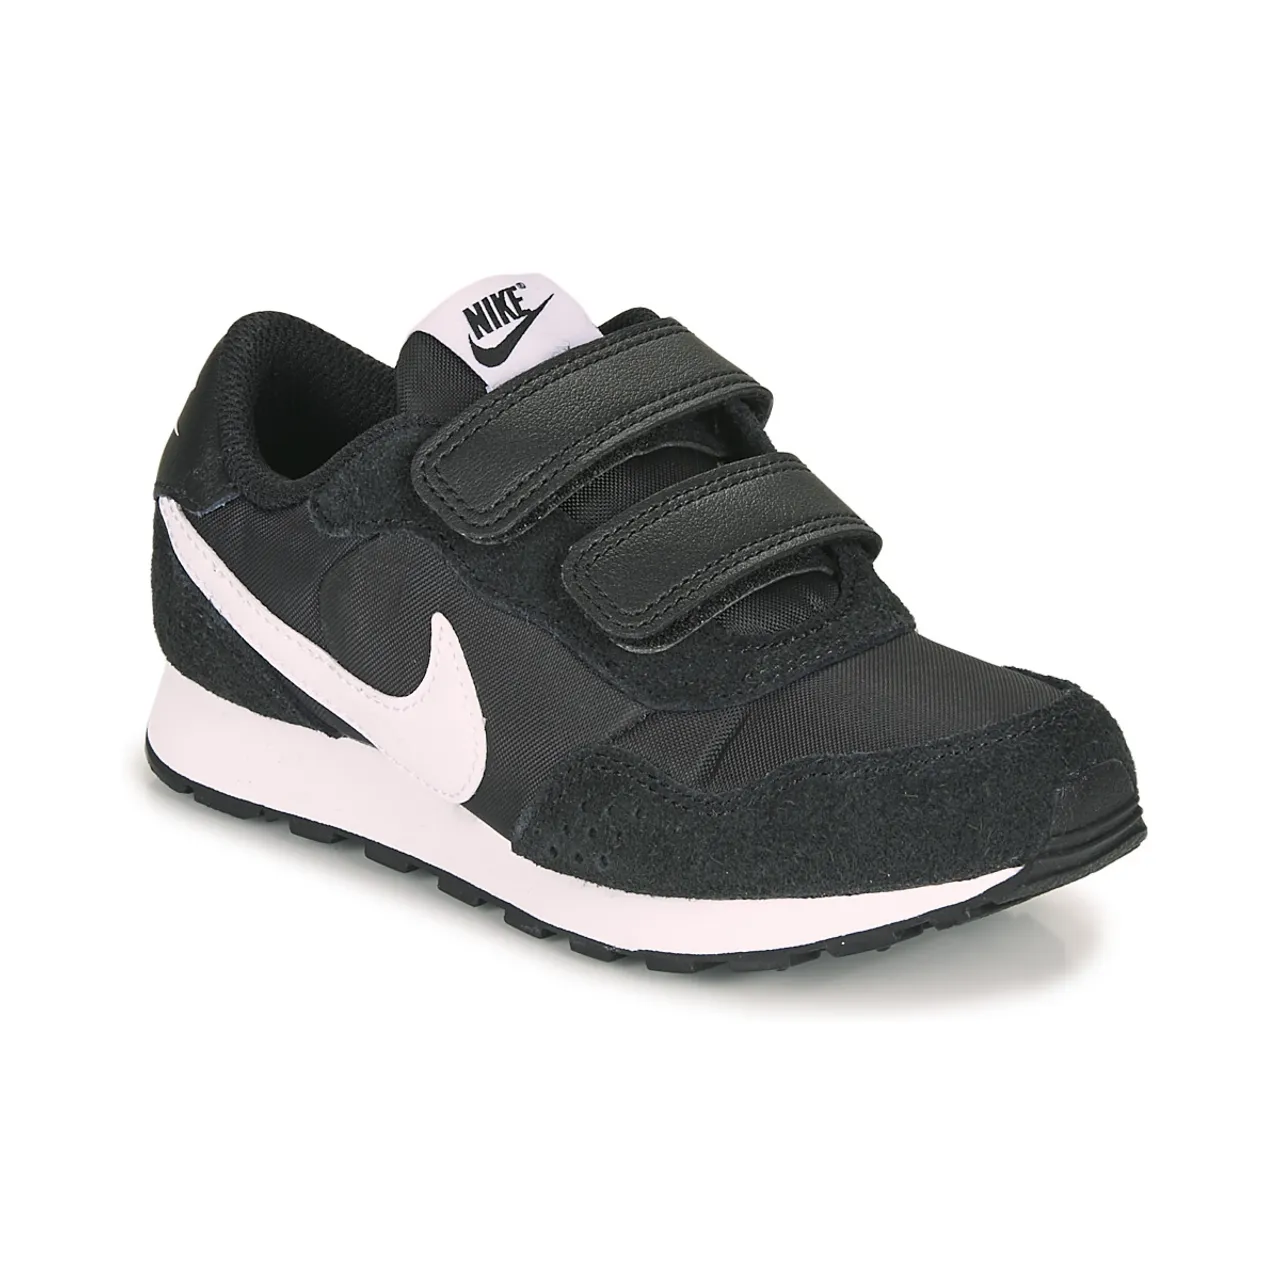 Nike  MD VALIANT PS  girls's Children's Shoes (Trainers) in Black